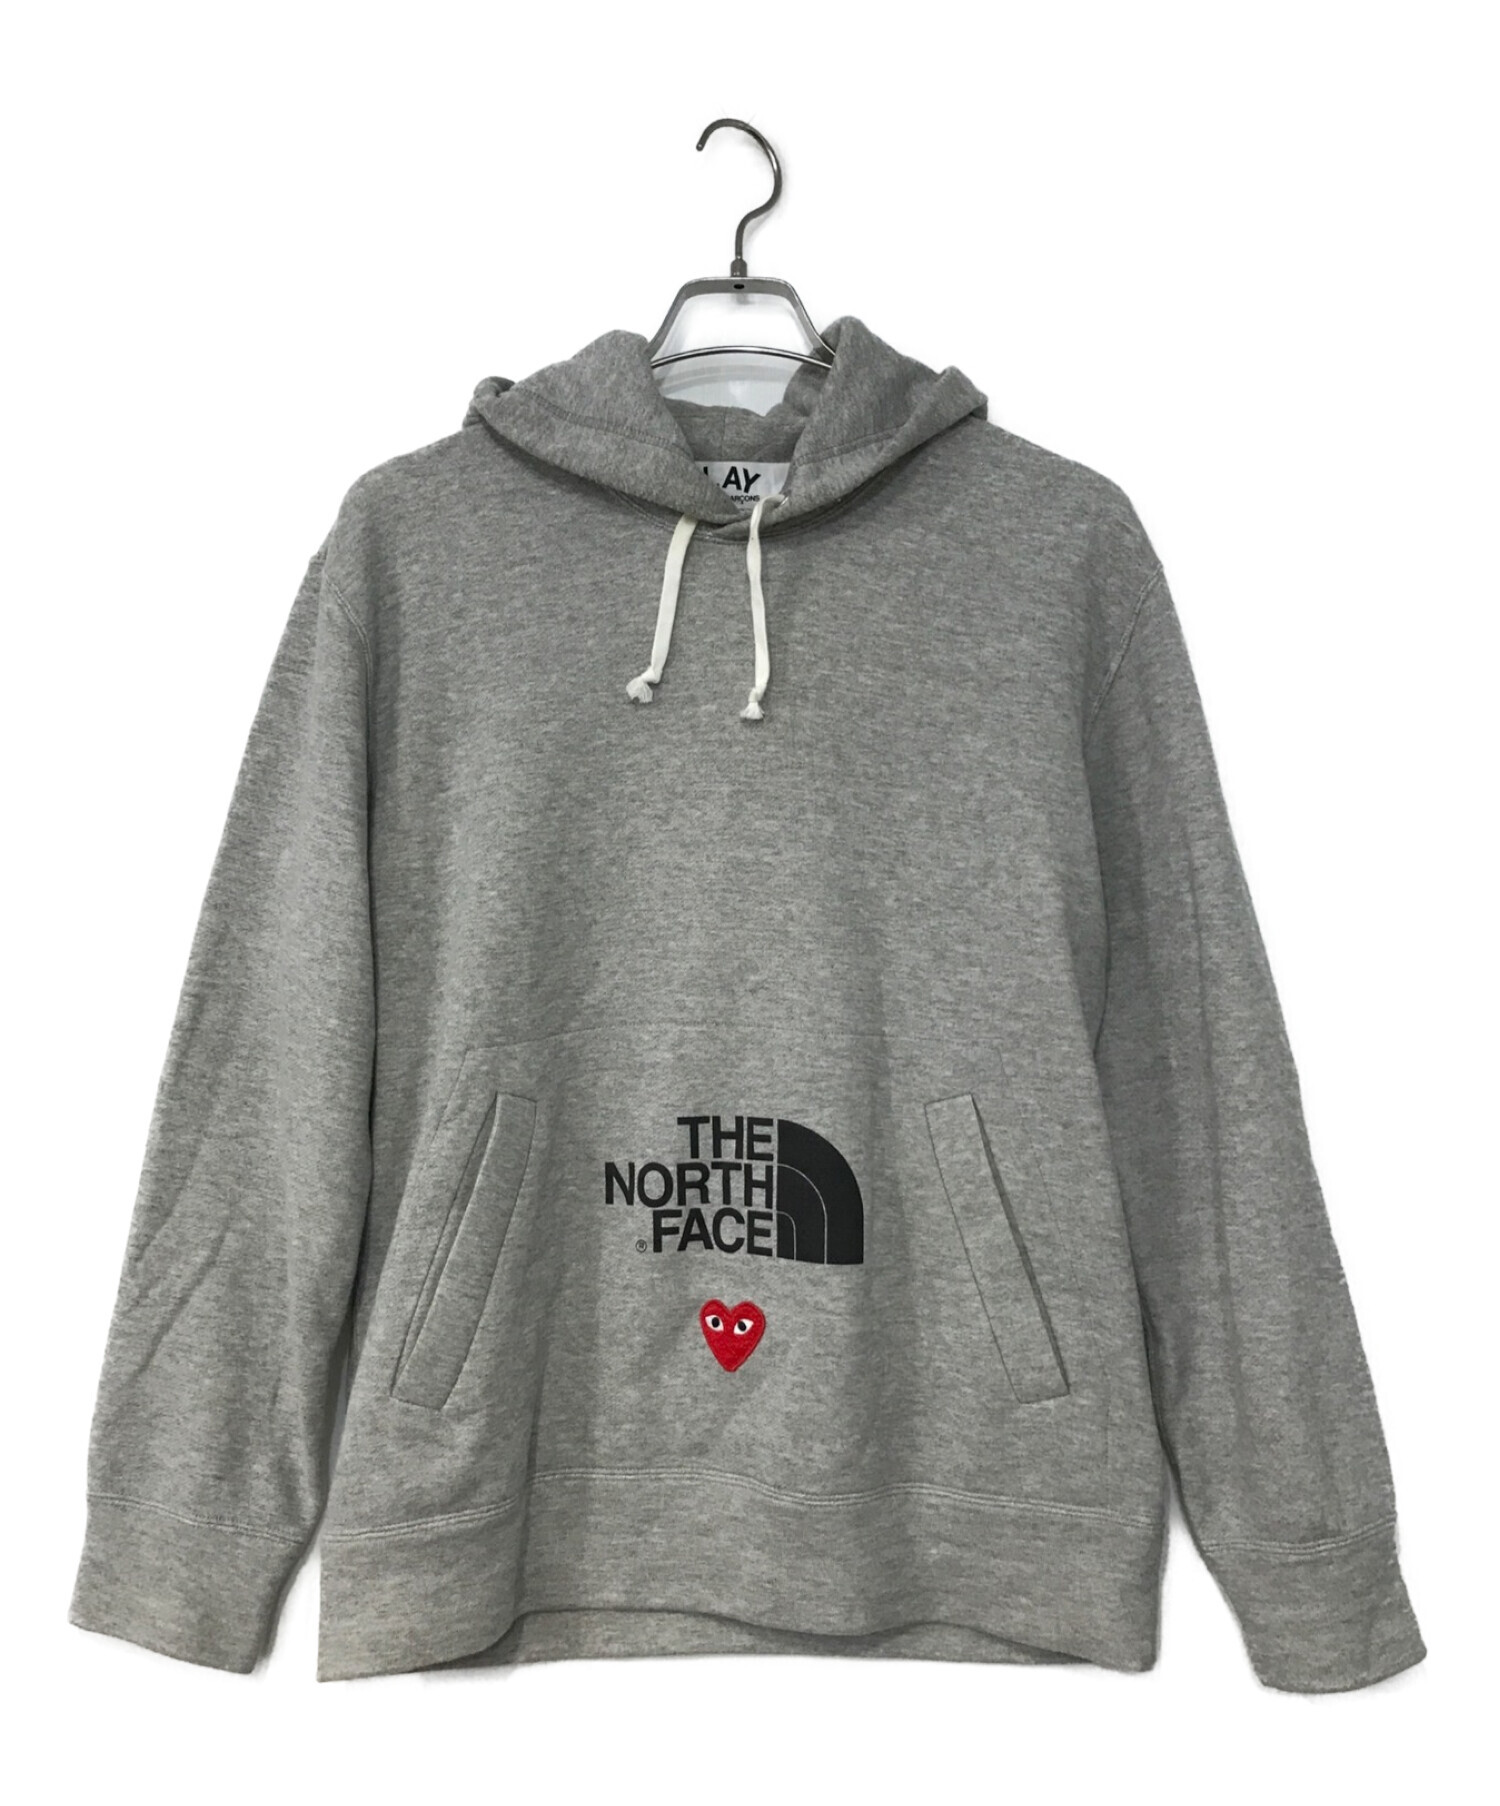 The North Face x CDG Pullover Hoodie